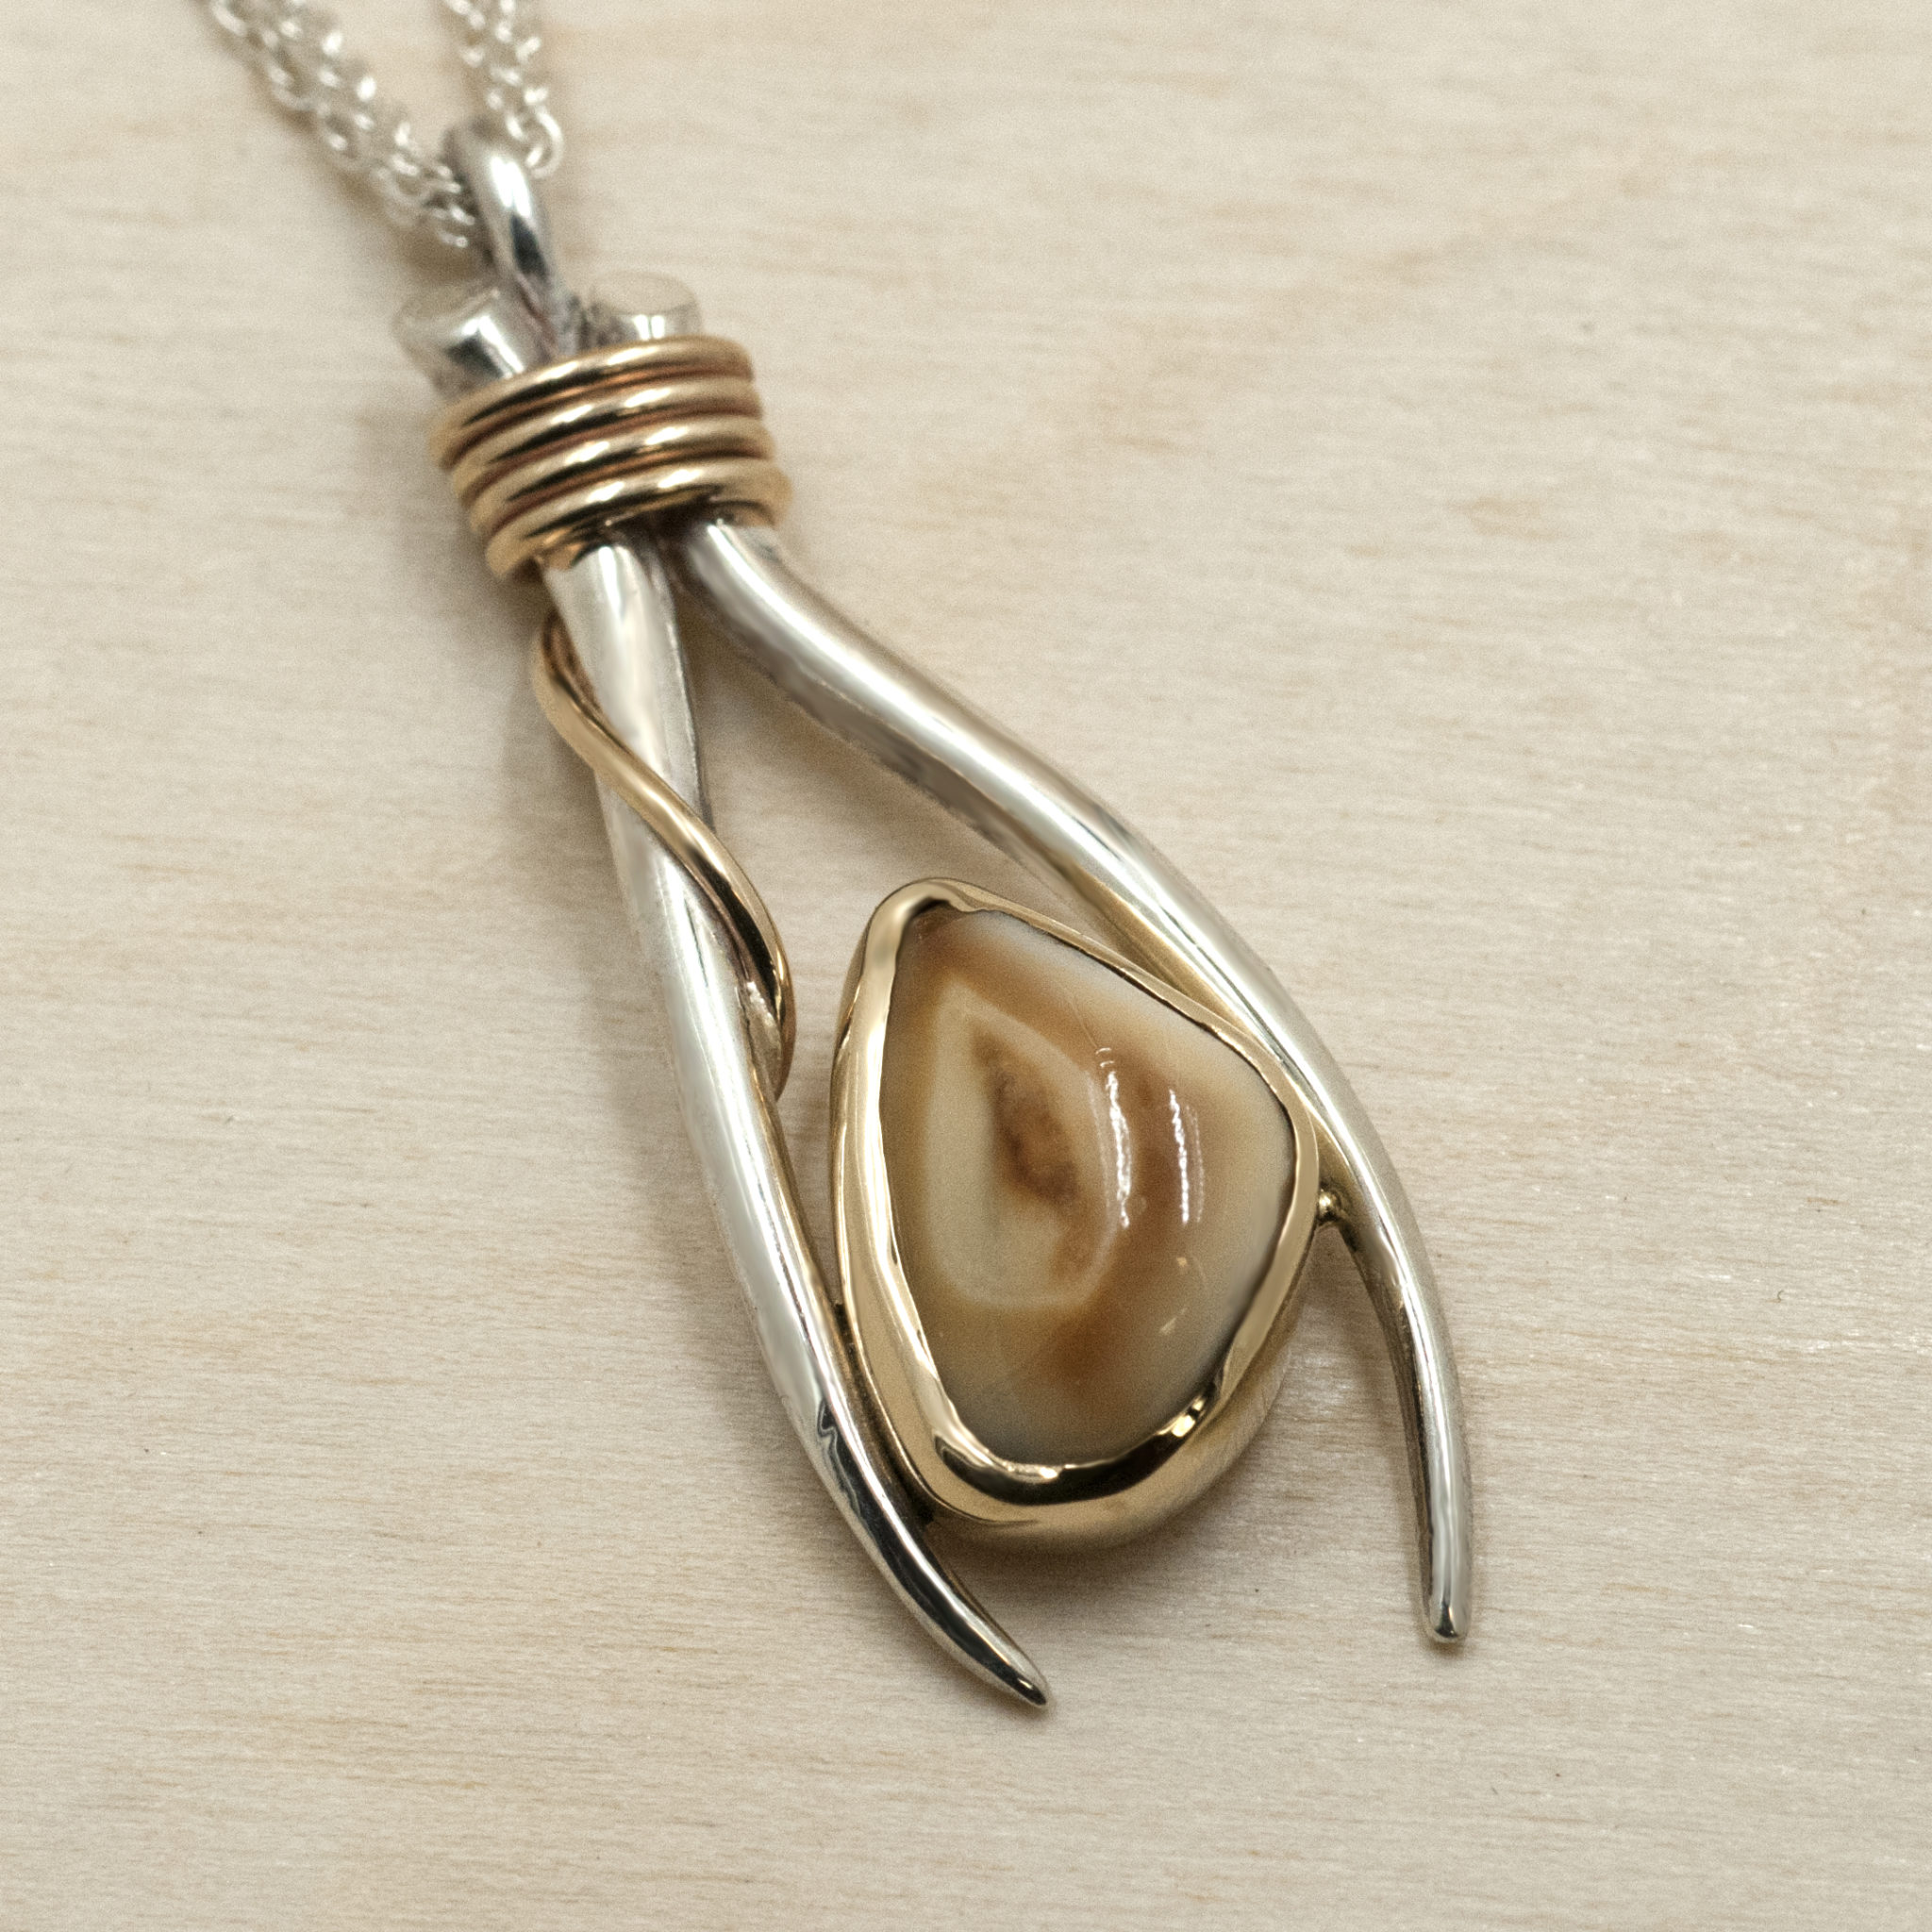 Elk Tooth Jewelry Archives - Dale’s Jewelers